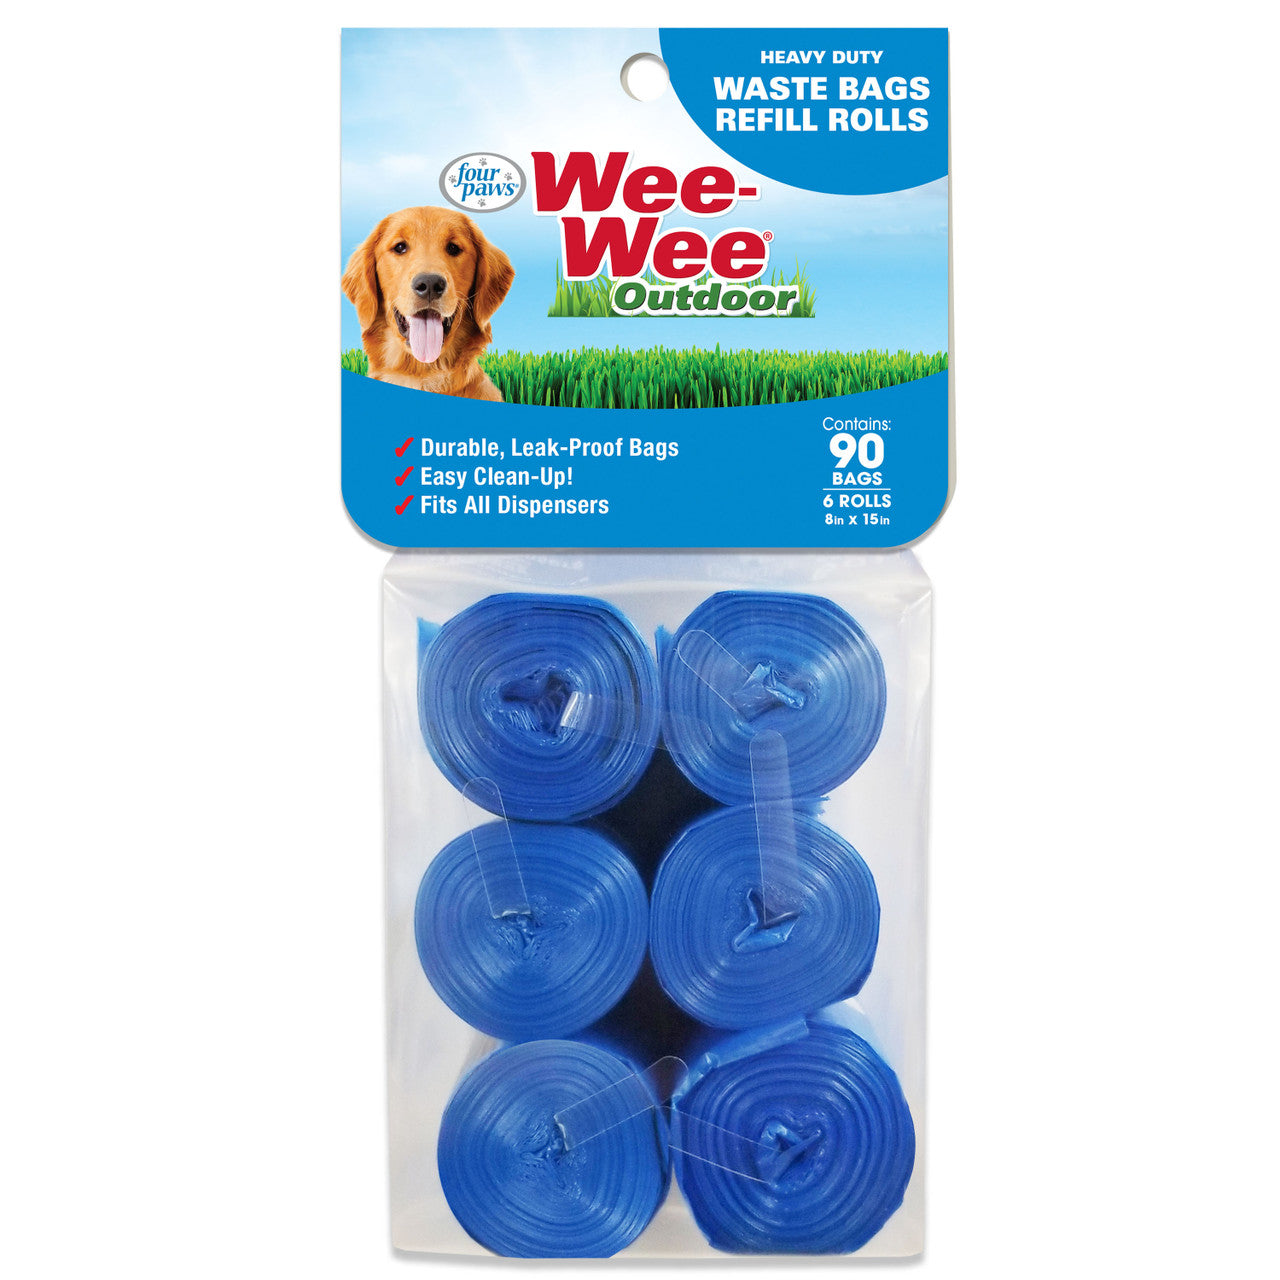 Four Paws Wee-Wee Outdoor Heavy Duty Dog Waste Bags Refill Rolls 90 Count